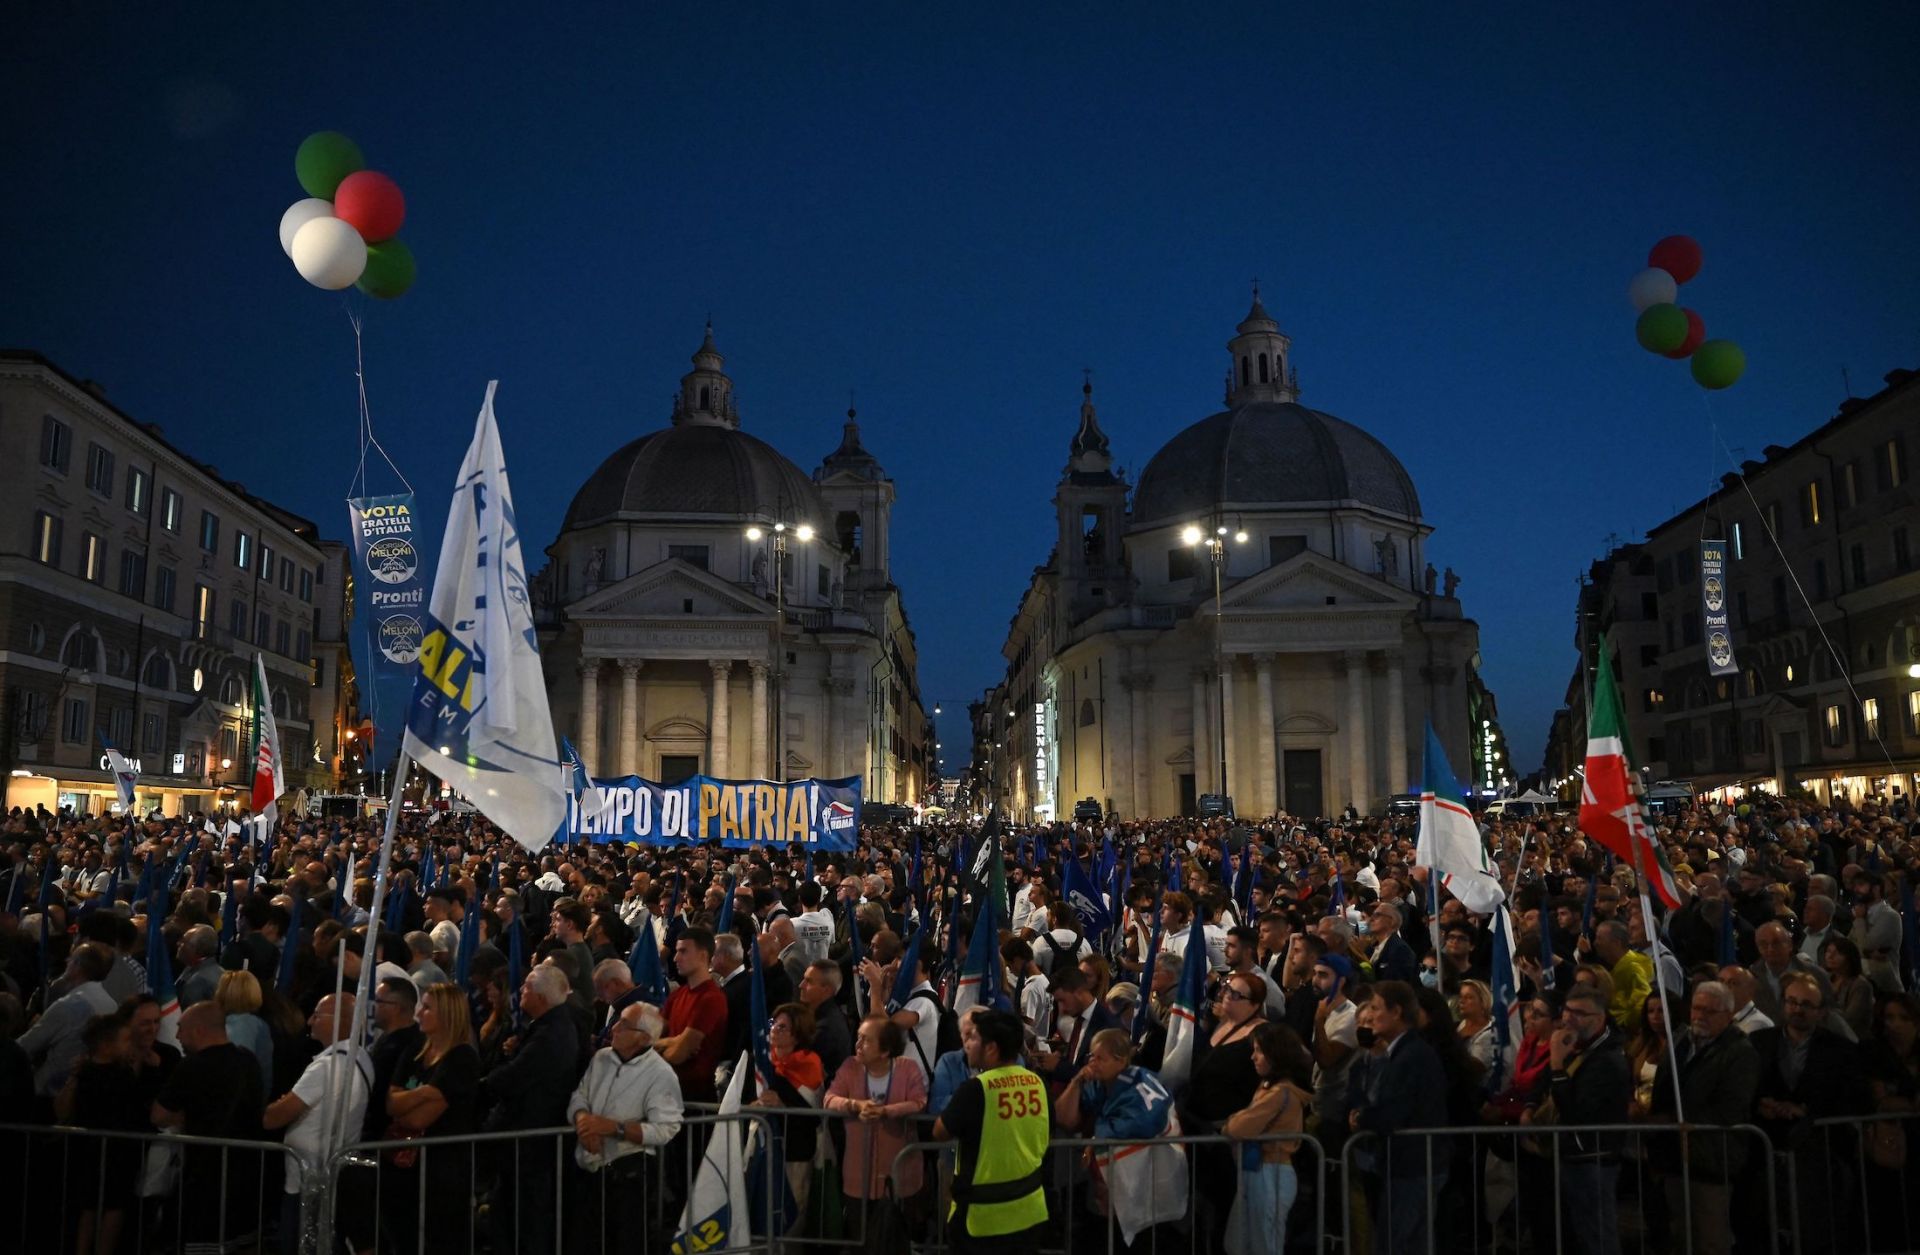 A joint rally of Italy's right-wing parties Brothers of Italy, Lega and Forza Italia takes place at Piazza del Popolo in Rome on Sept. 22, 2022.